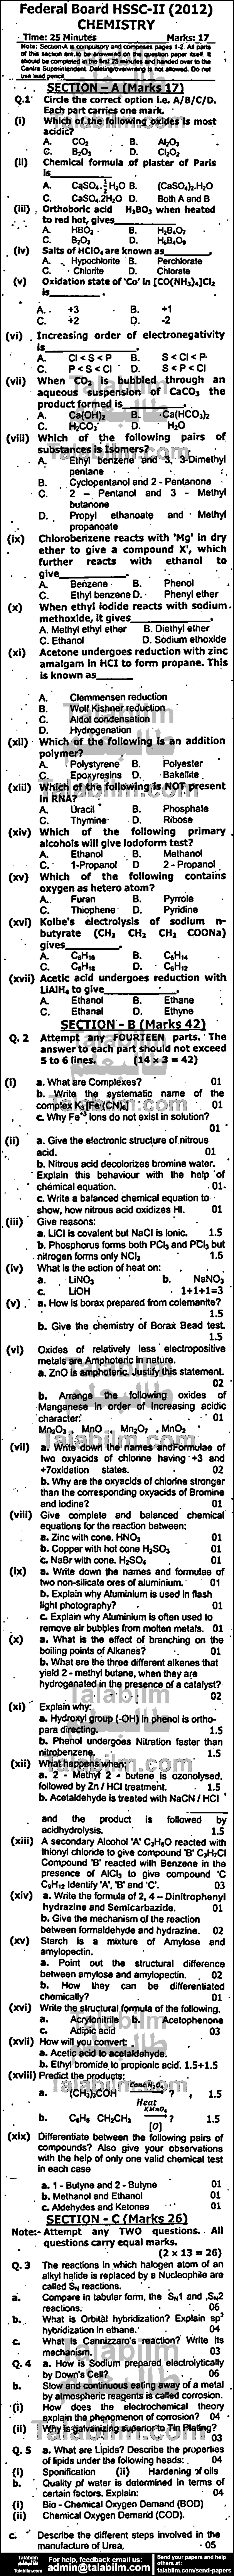 Chemistry 0 past paper for Group-I 2012